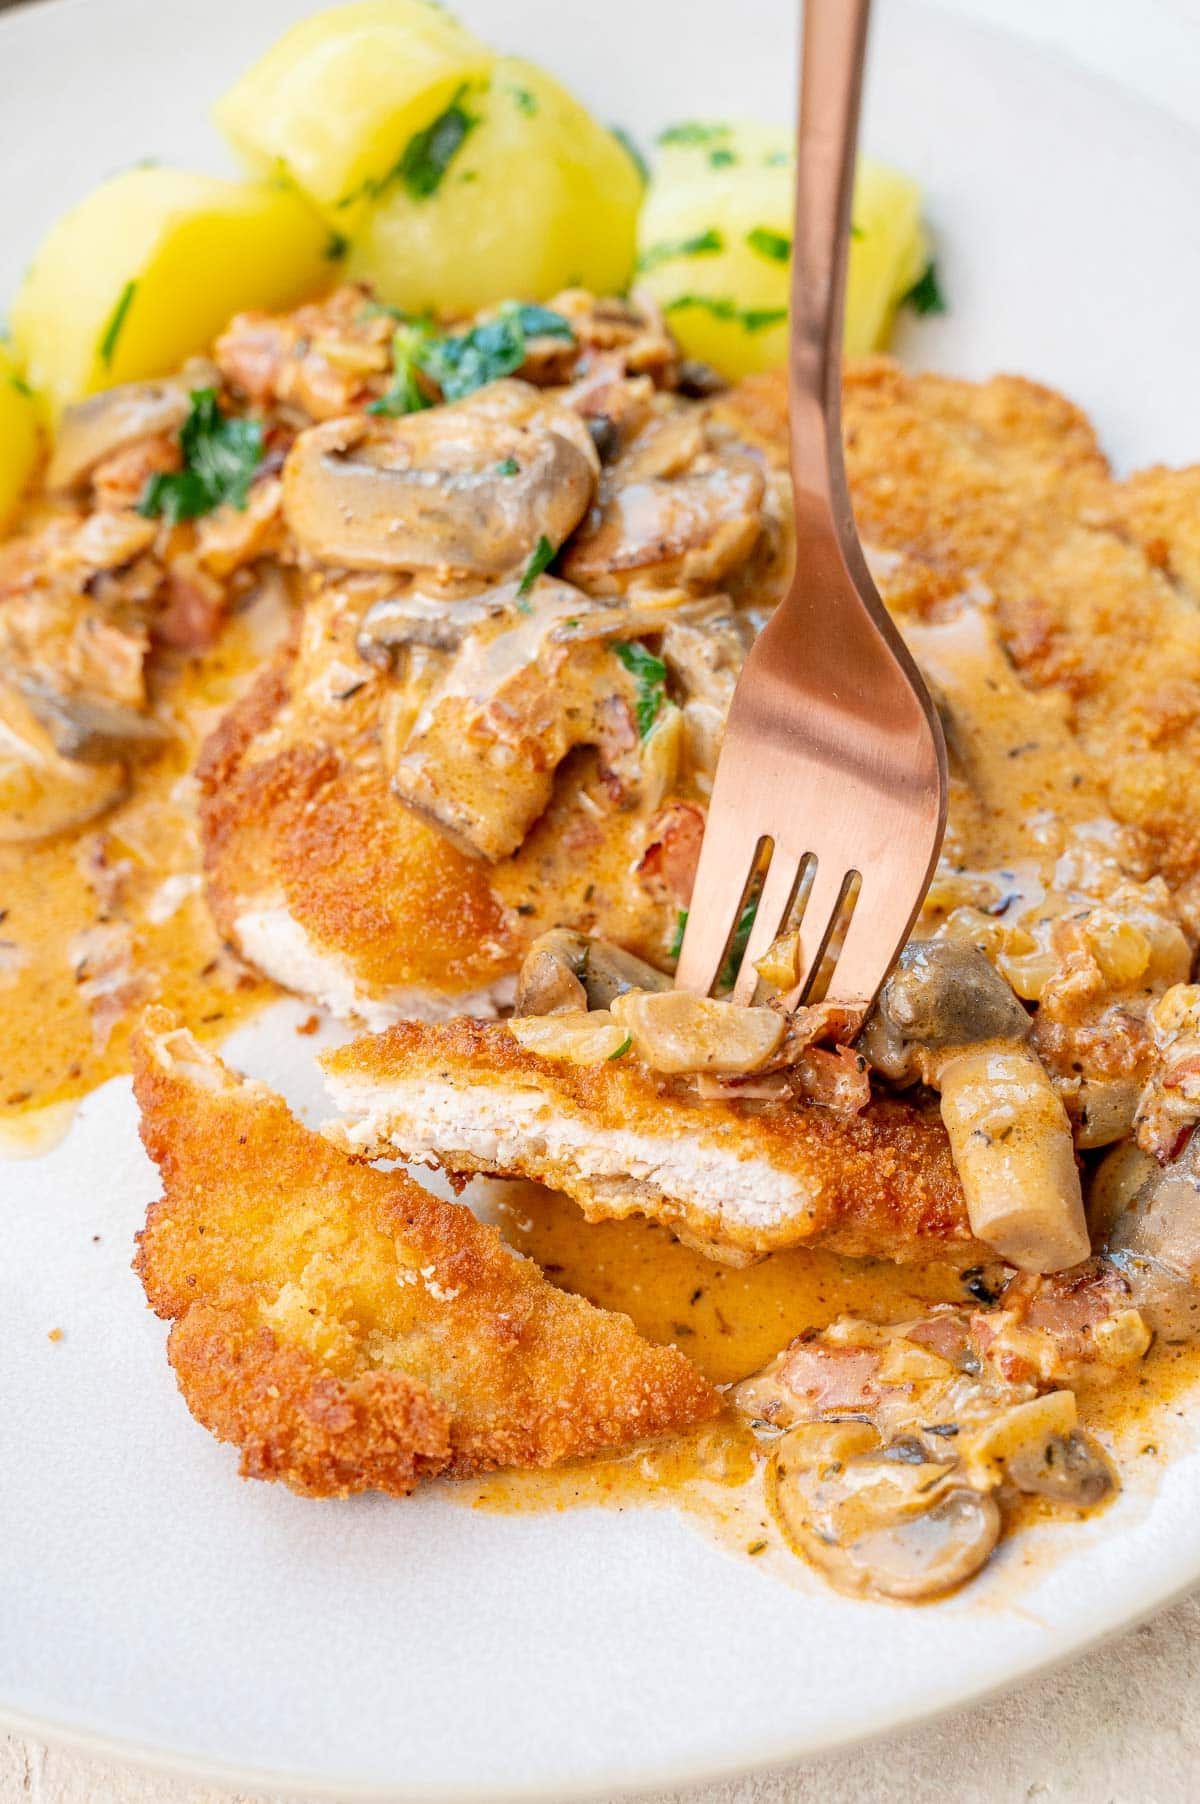 Jägerschnitzel with mushroom gravy and potatoes on a beige plate. A piece of the Schnitzel is stuck on a gold fork.